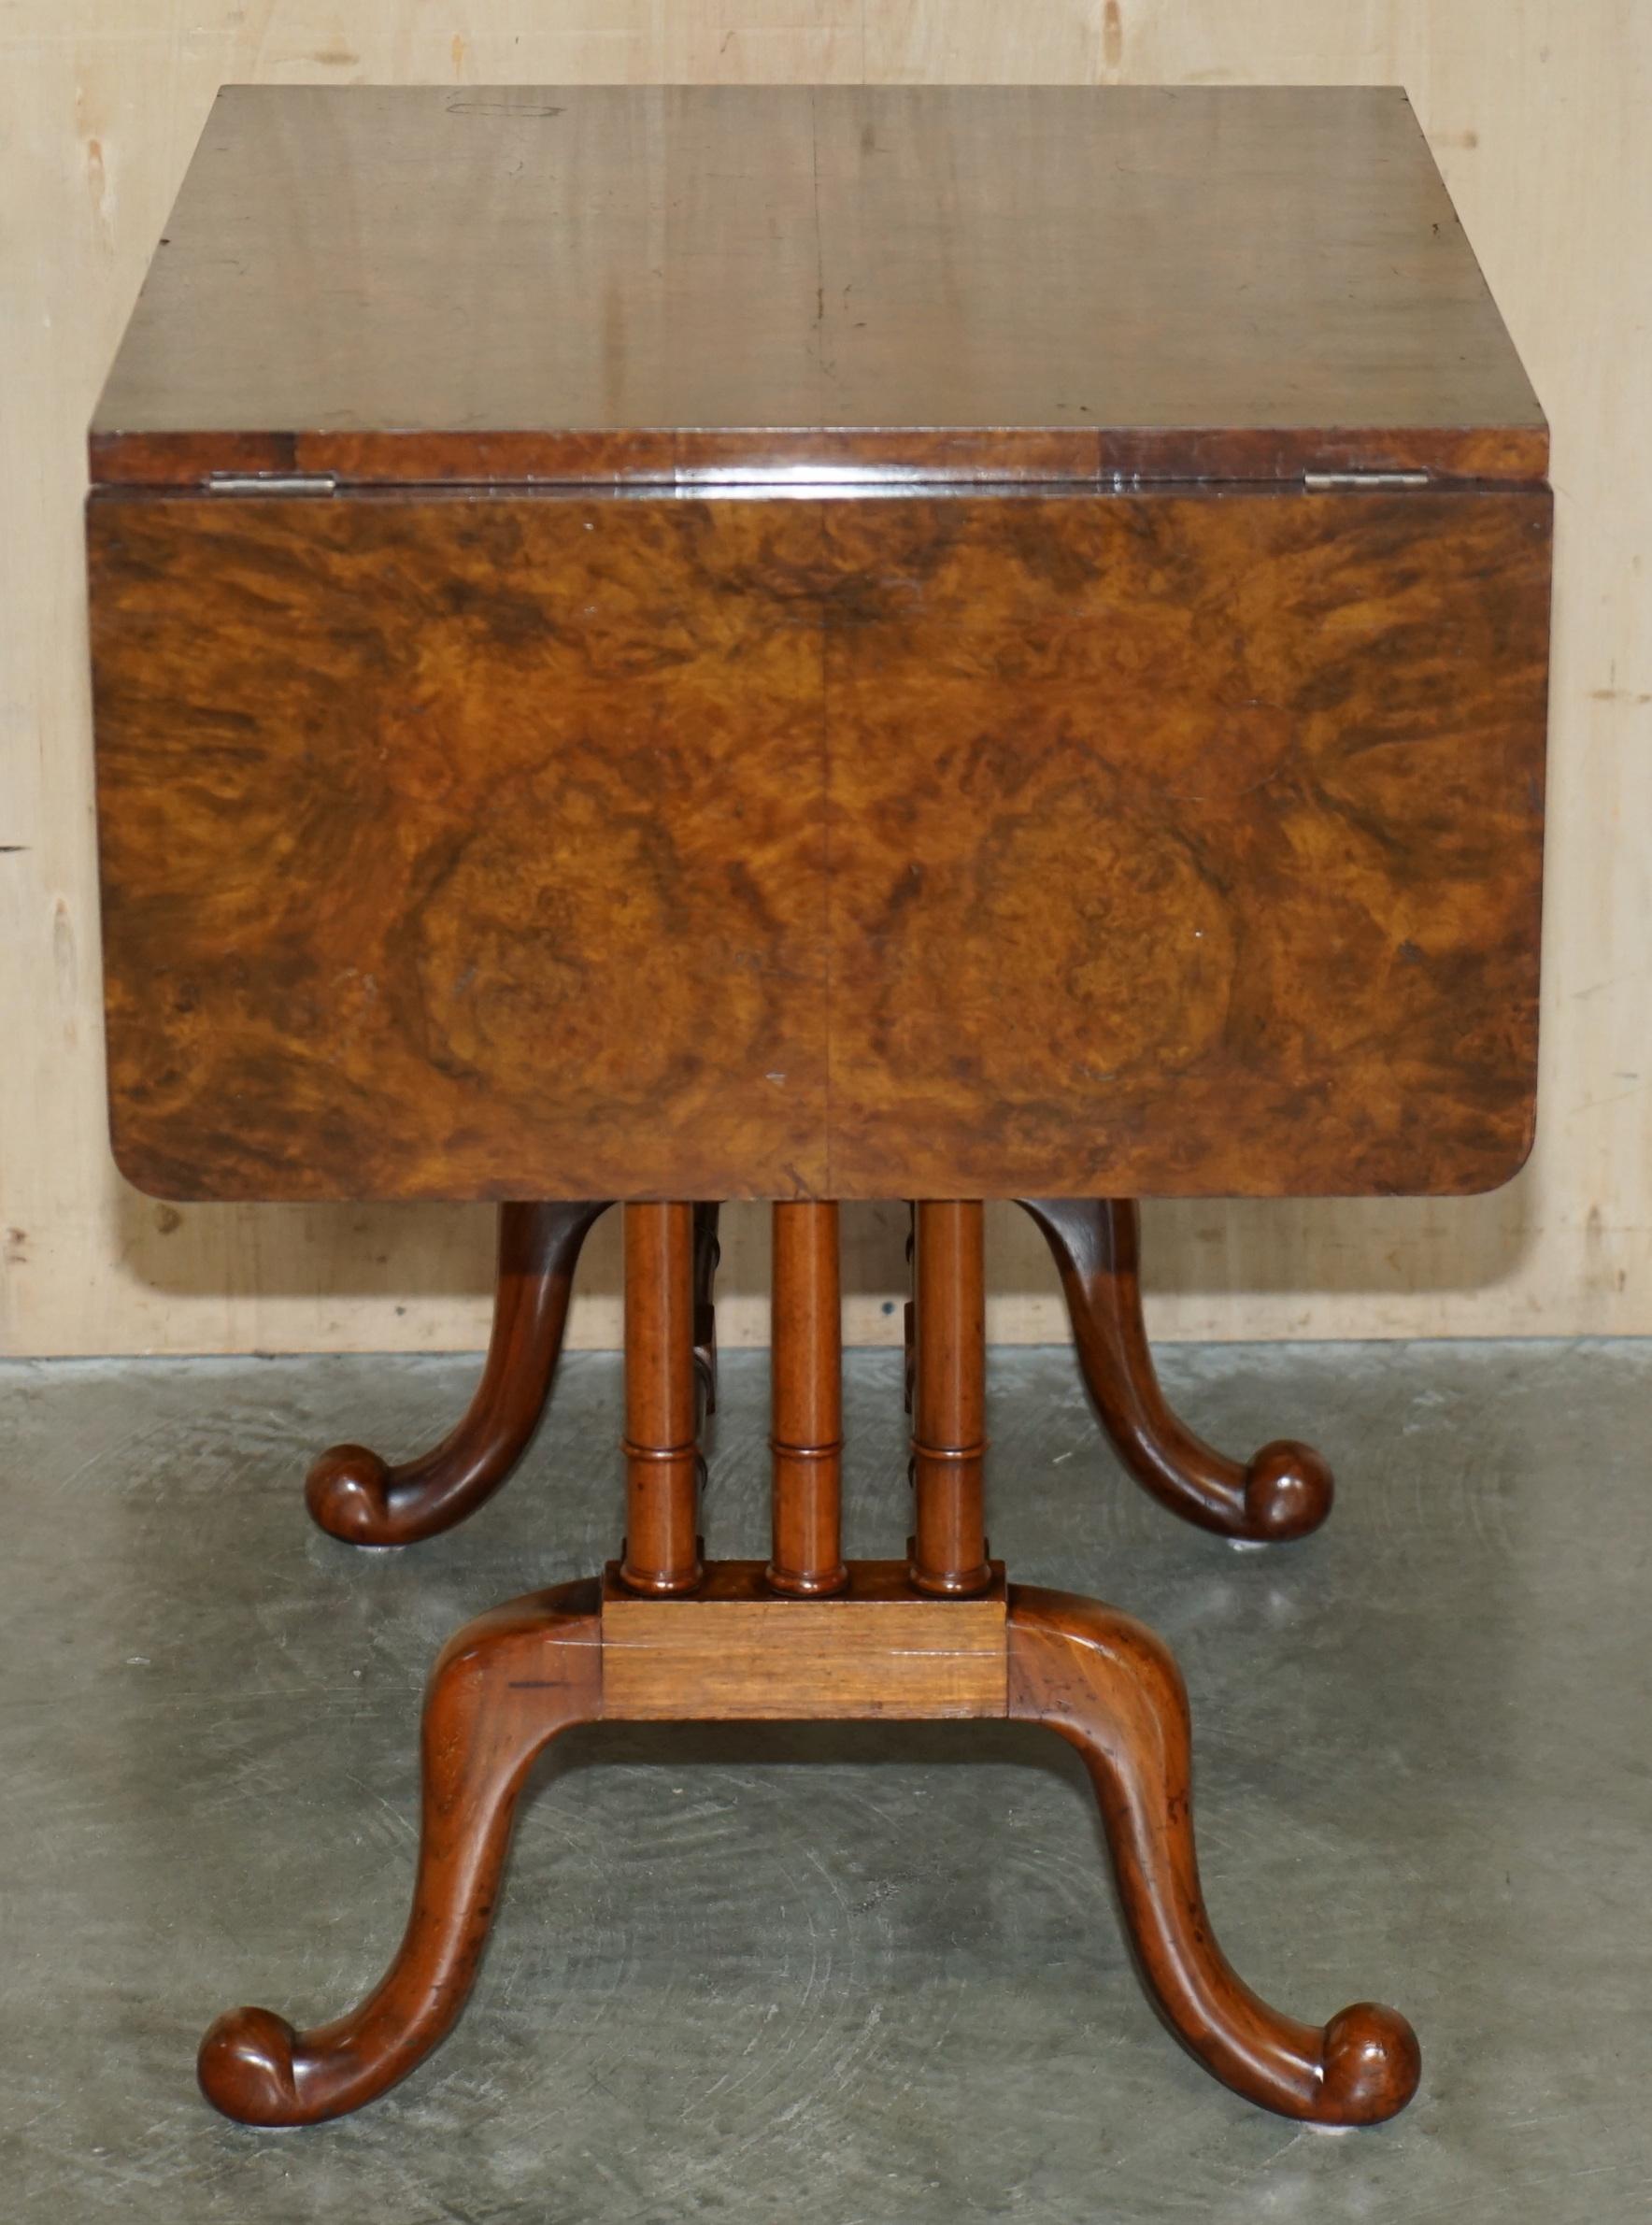 ANTIQUE CIRCA 1880 EXTRA LARGE BURR WALNUT EXTENDING SOFA TABLE STUNNING PATiNA For Sale 2